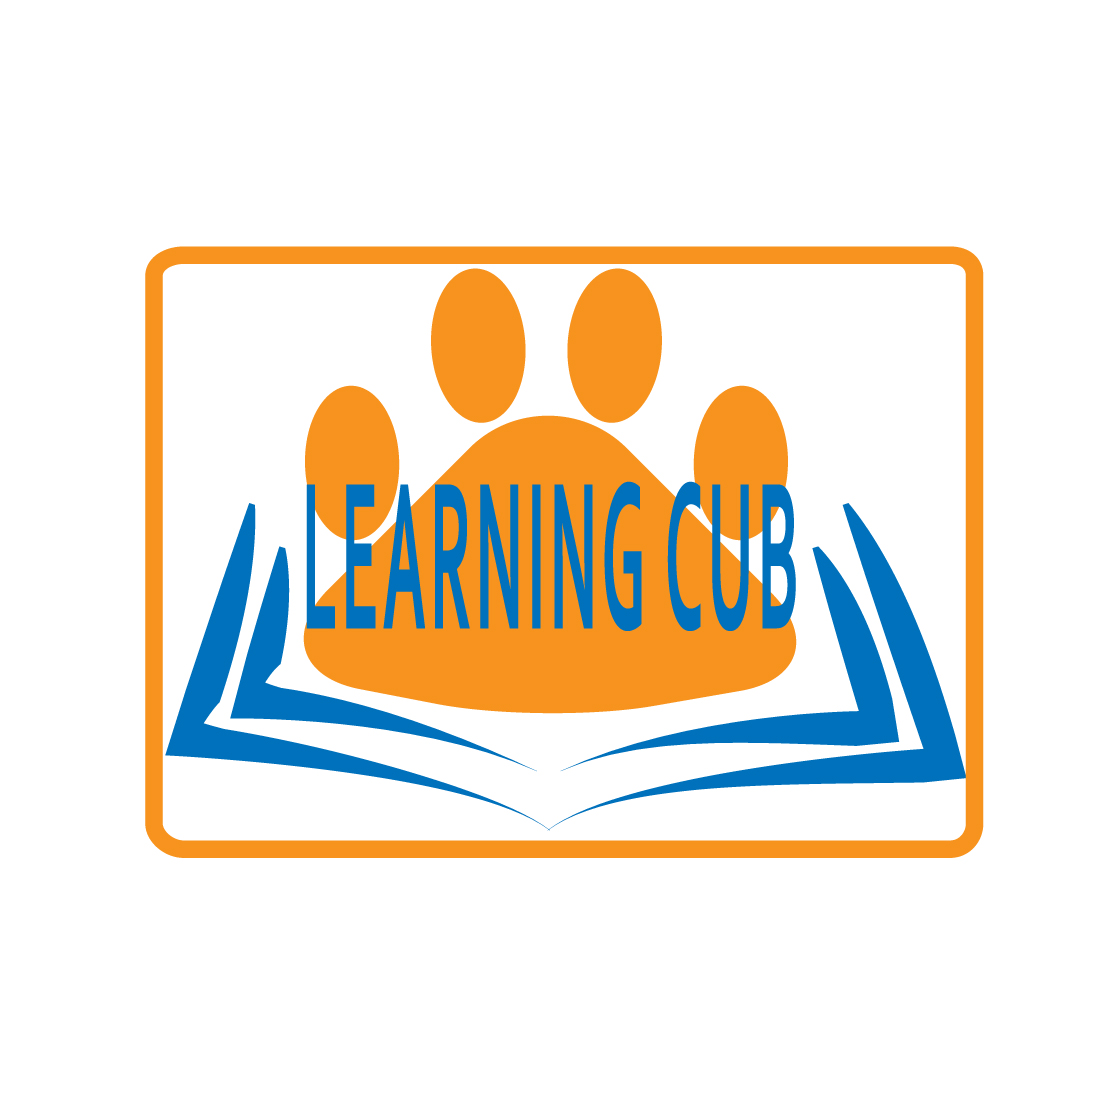 Learning Club - Logo preview image.